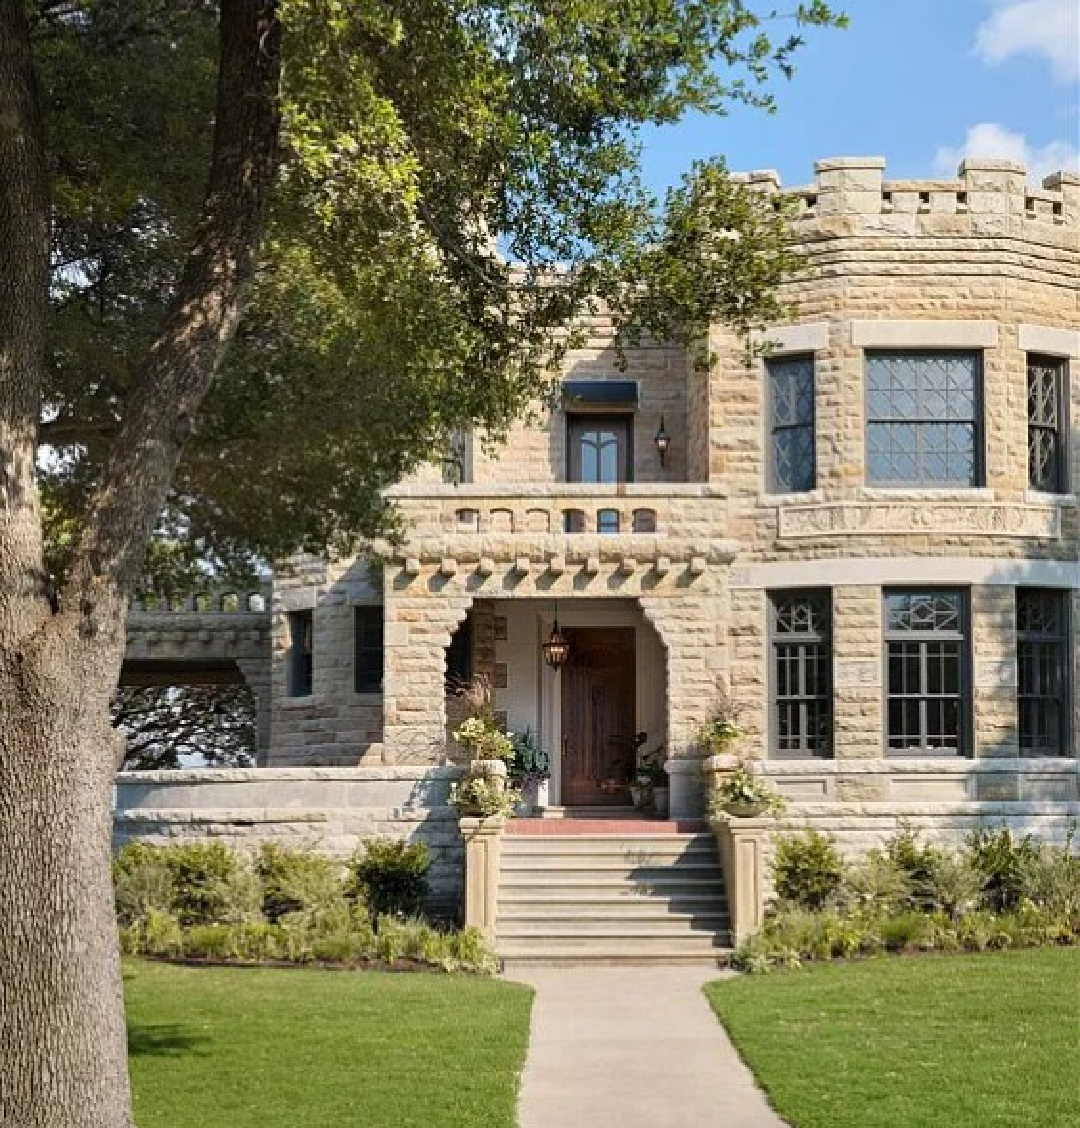 Exterior of The Castle in Waco, TX renovated by Fixer Upper.